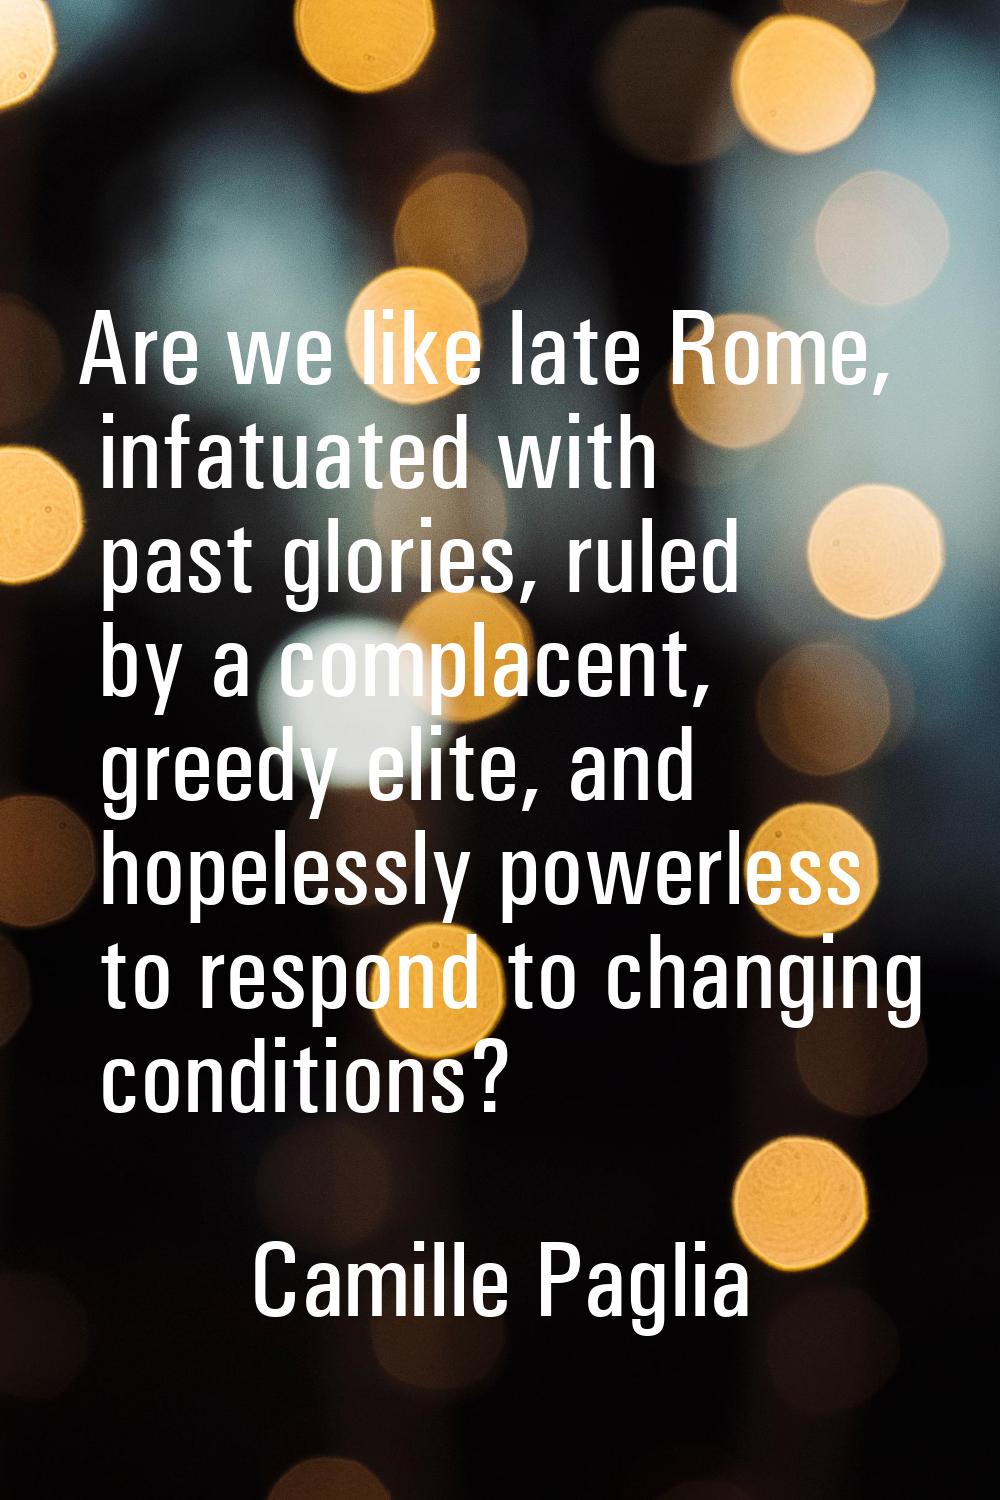 Are we like late Rome, infatuated with past glories, ruled by a complacent, greedy elite, and hopel